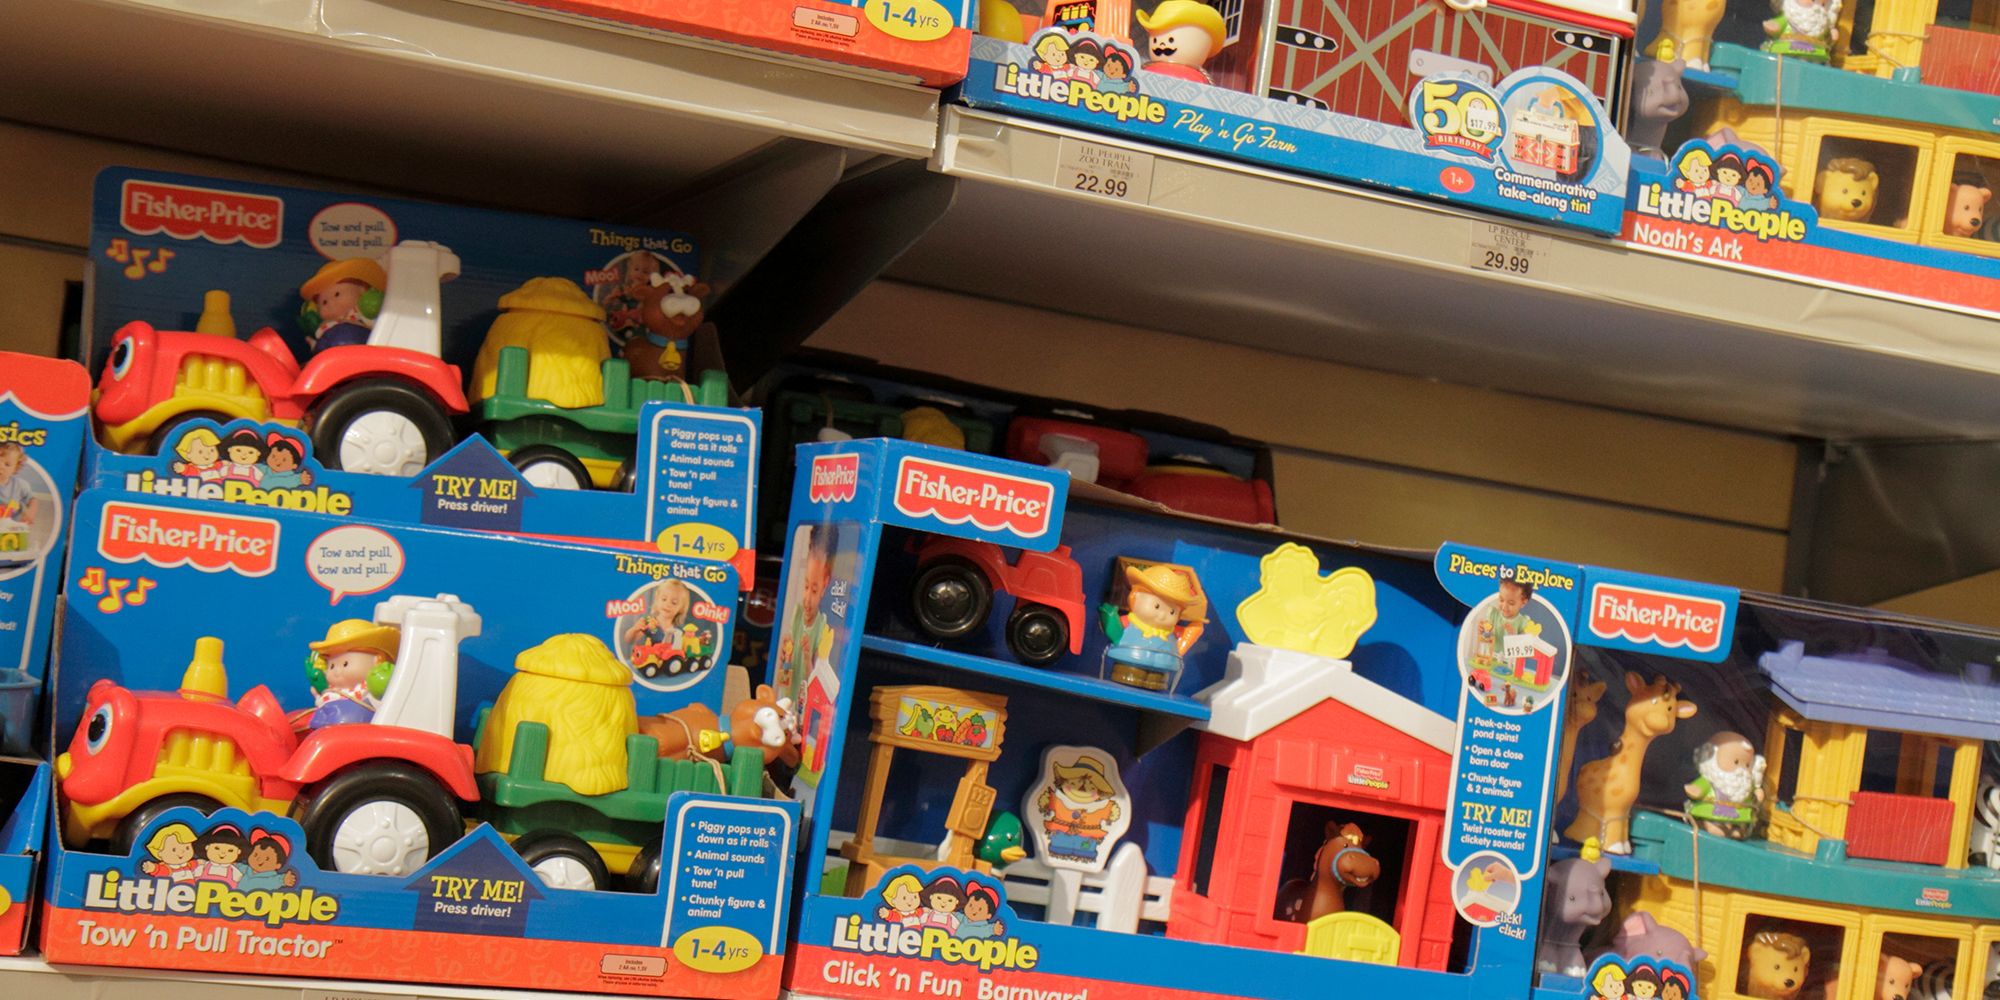 The Most Popular Toys During the Holidays Since 1983 (Infographic)